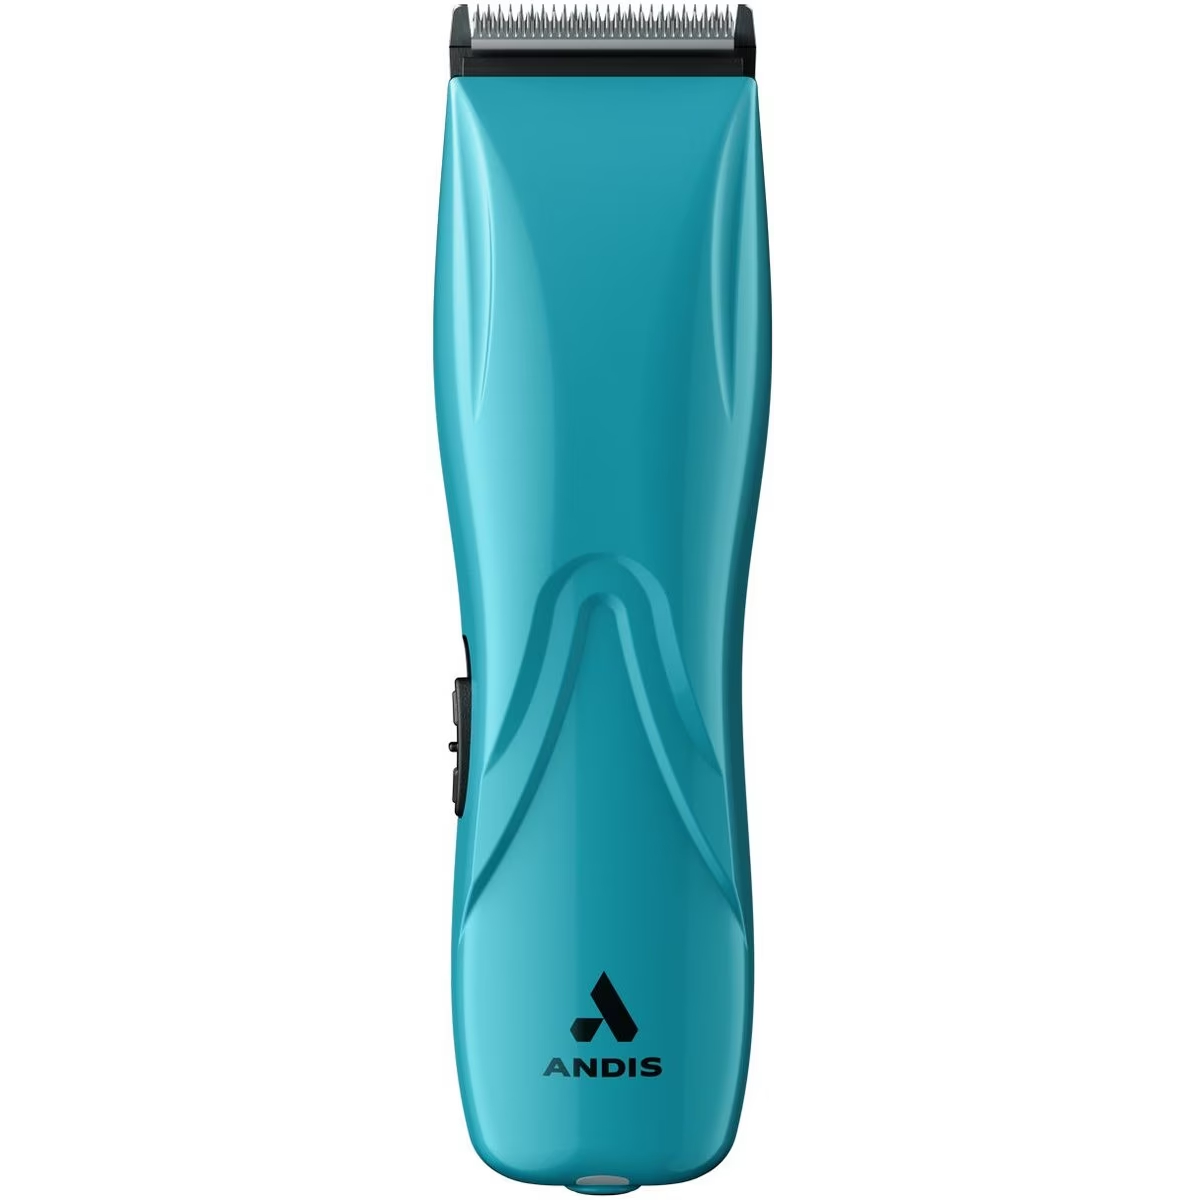 Andis 73515 Pulse Li 5 Cord/Cordless Grooming Clipper